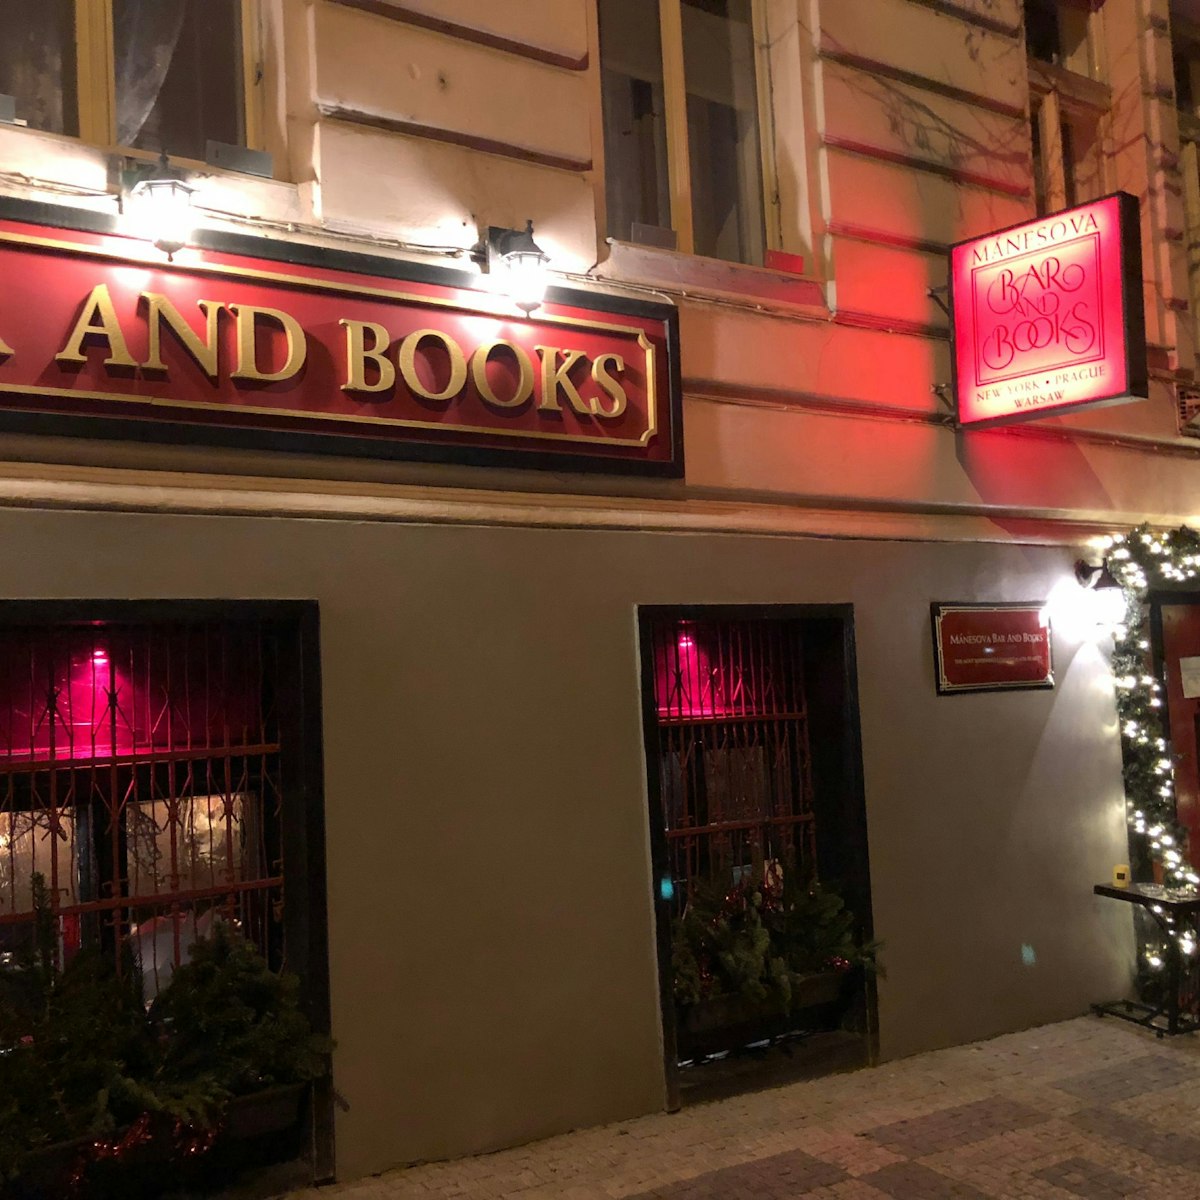 The inviting exterior of Bar and Books